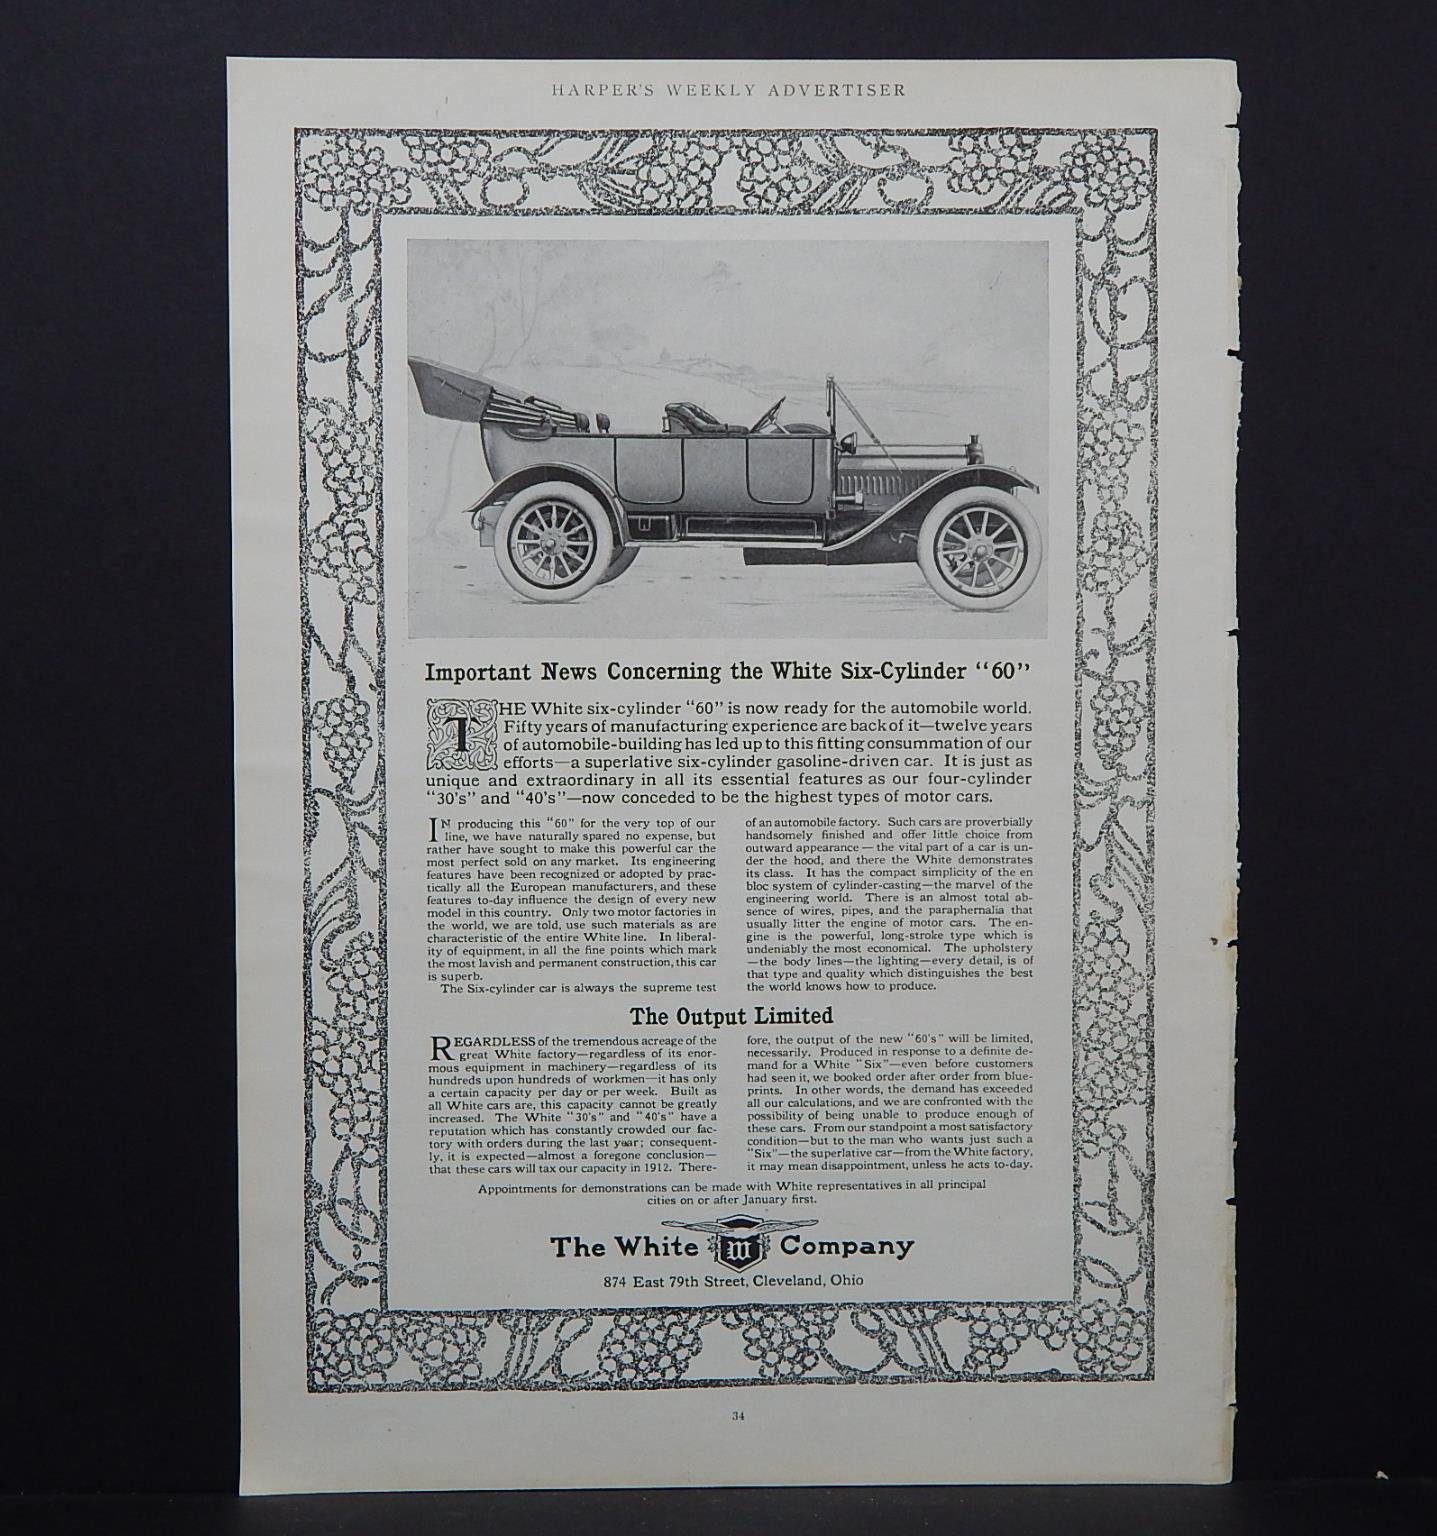 Harper\'s Weekly, c. 1912 Automobile Ad #5 - White Six-Cylinder \